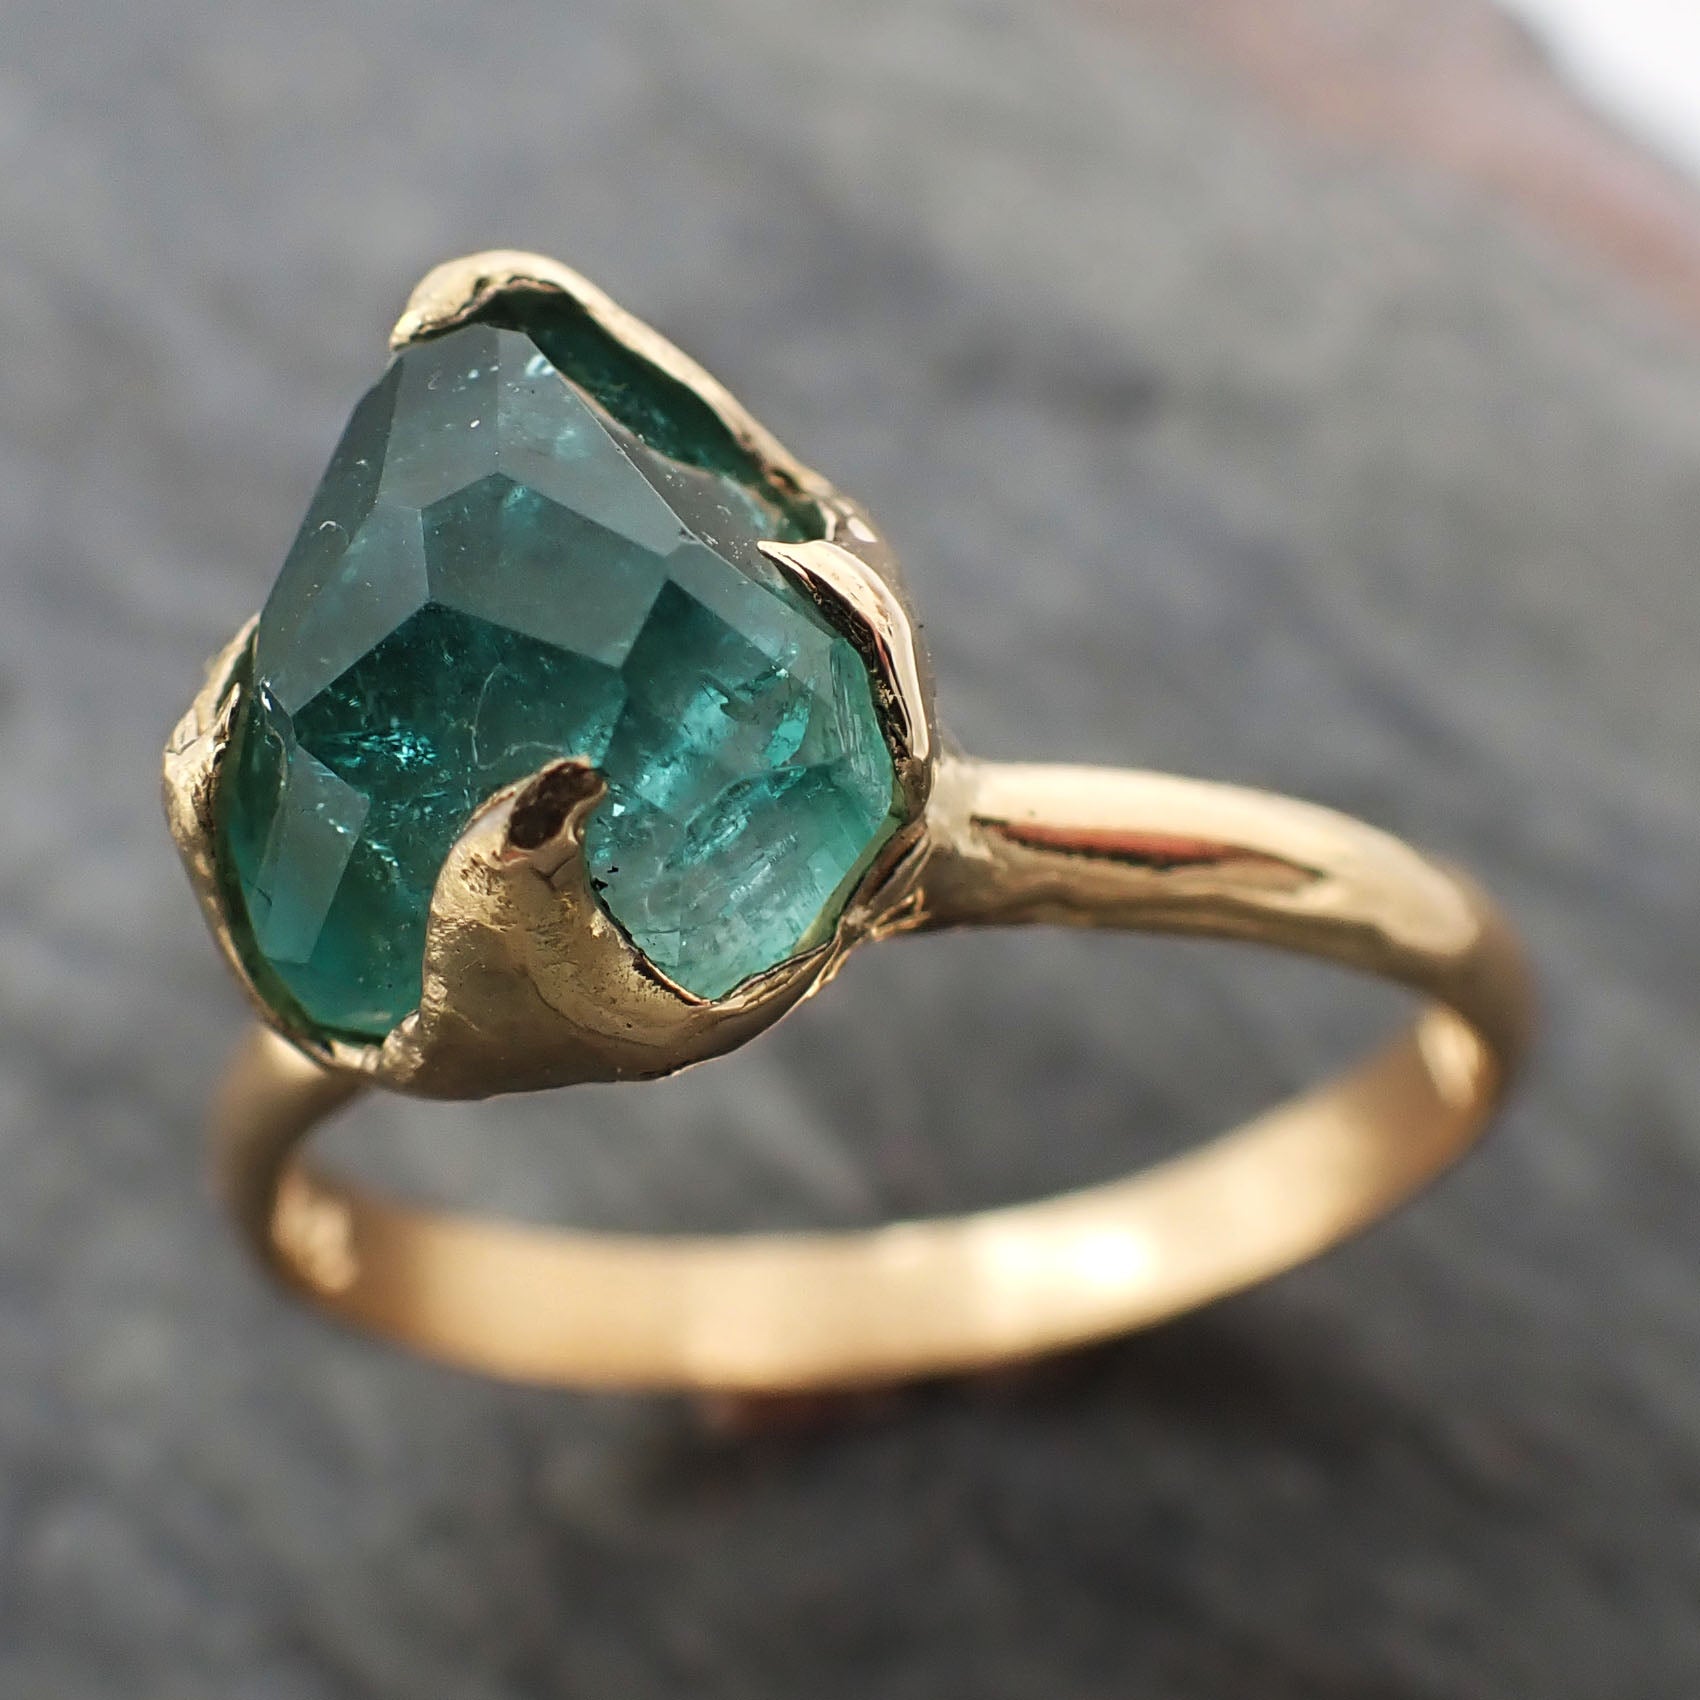 partially faceted solitaire green tourmaline 18k gold engagement ring one of a kind gemstone ring byangeline 2319 Alternative Engagement